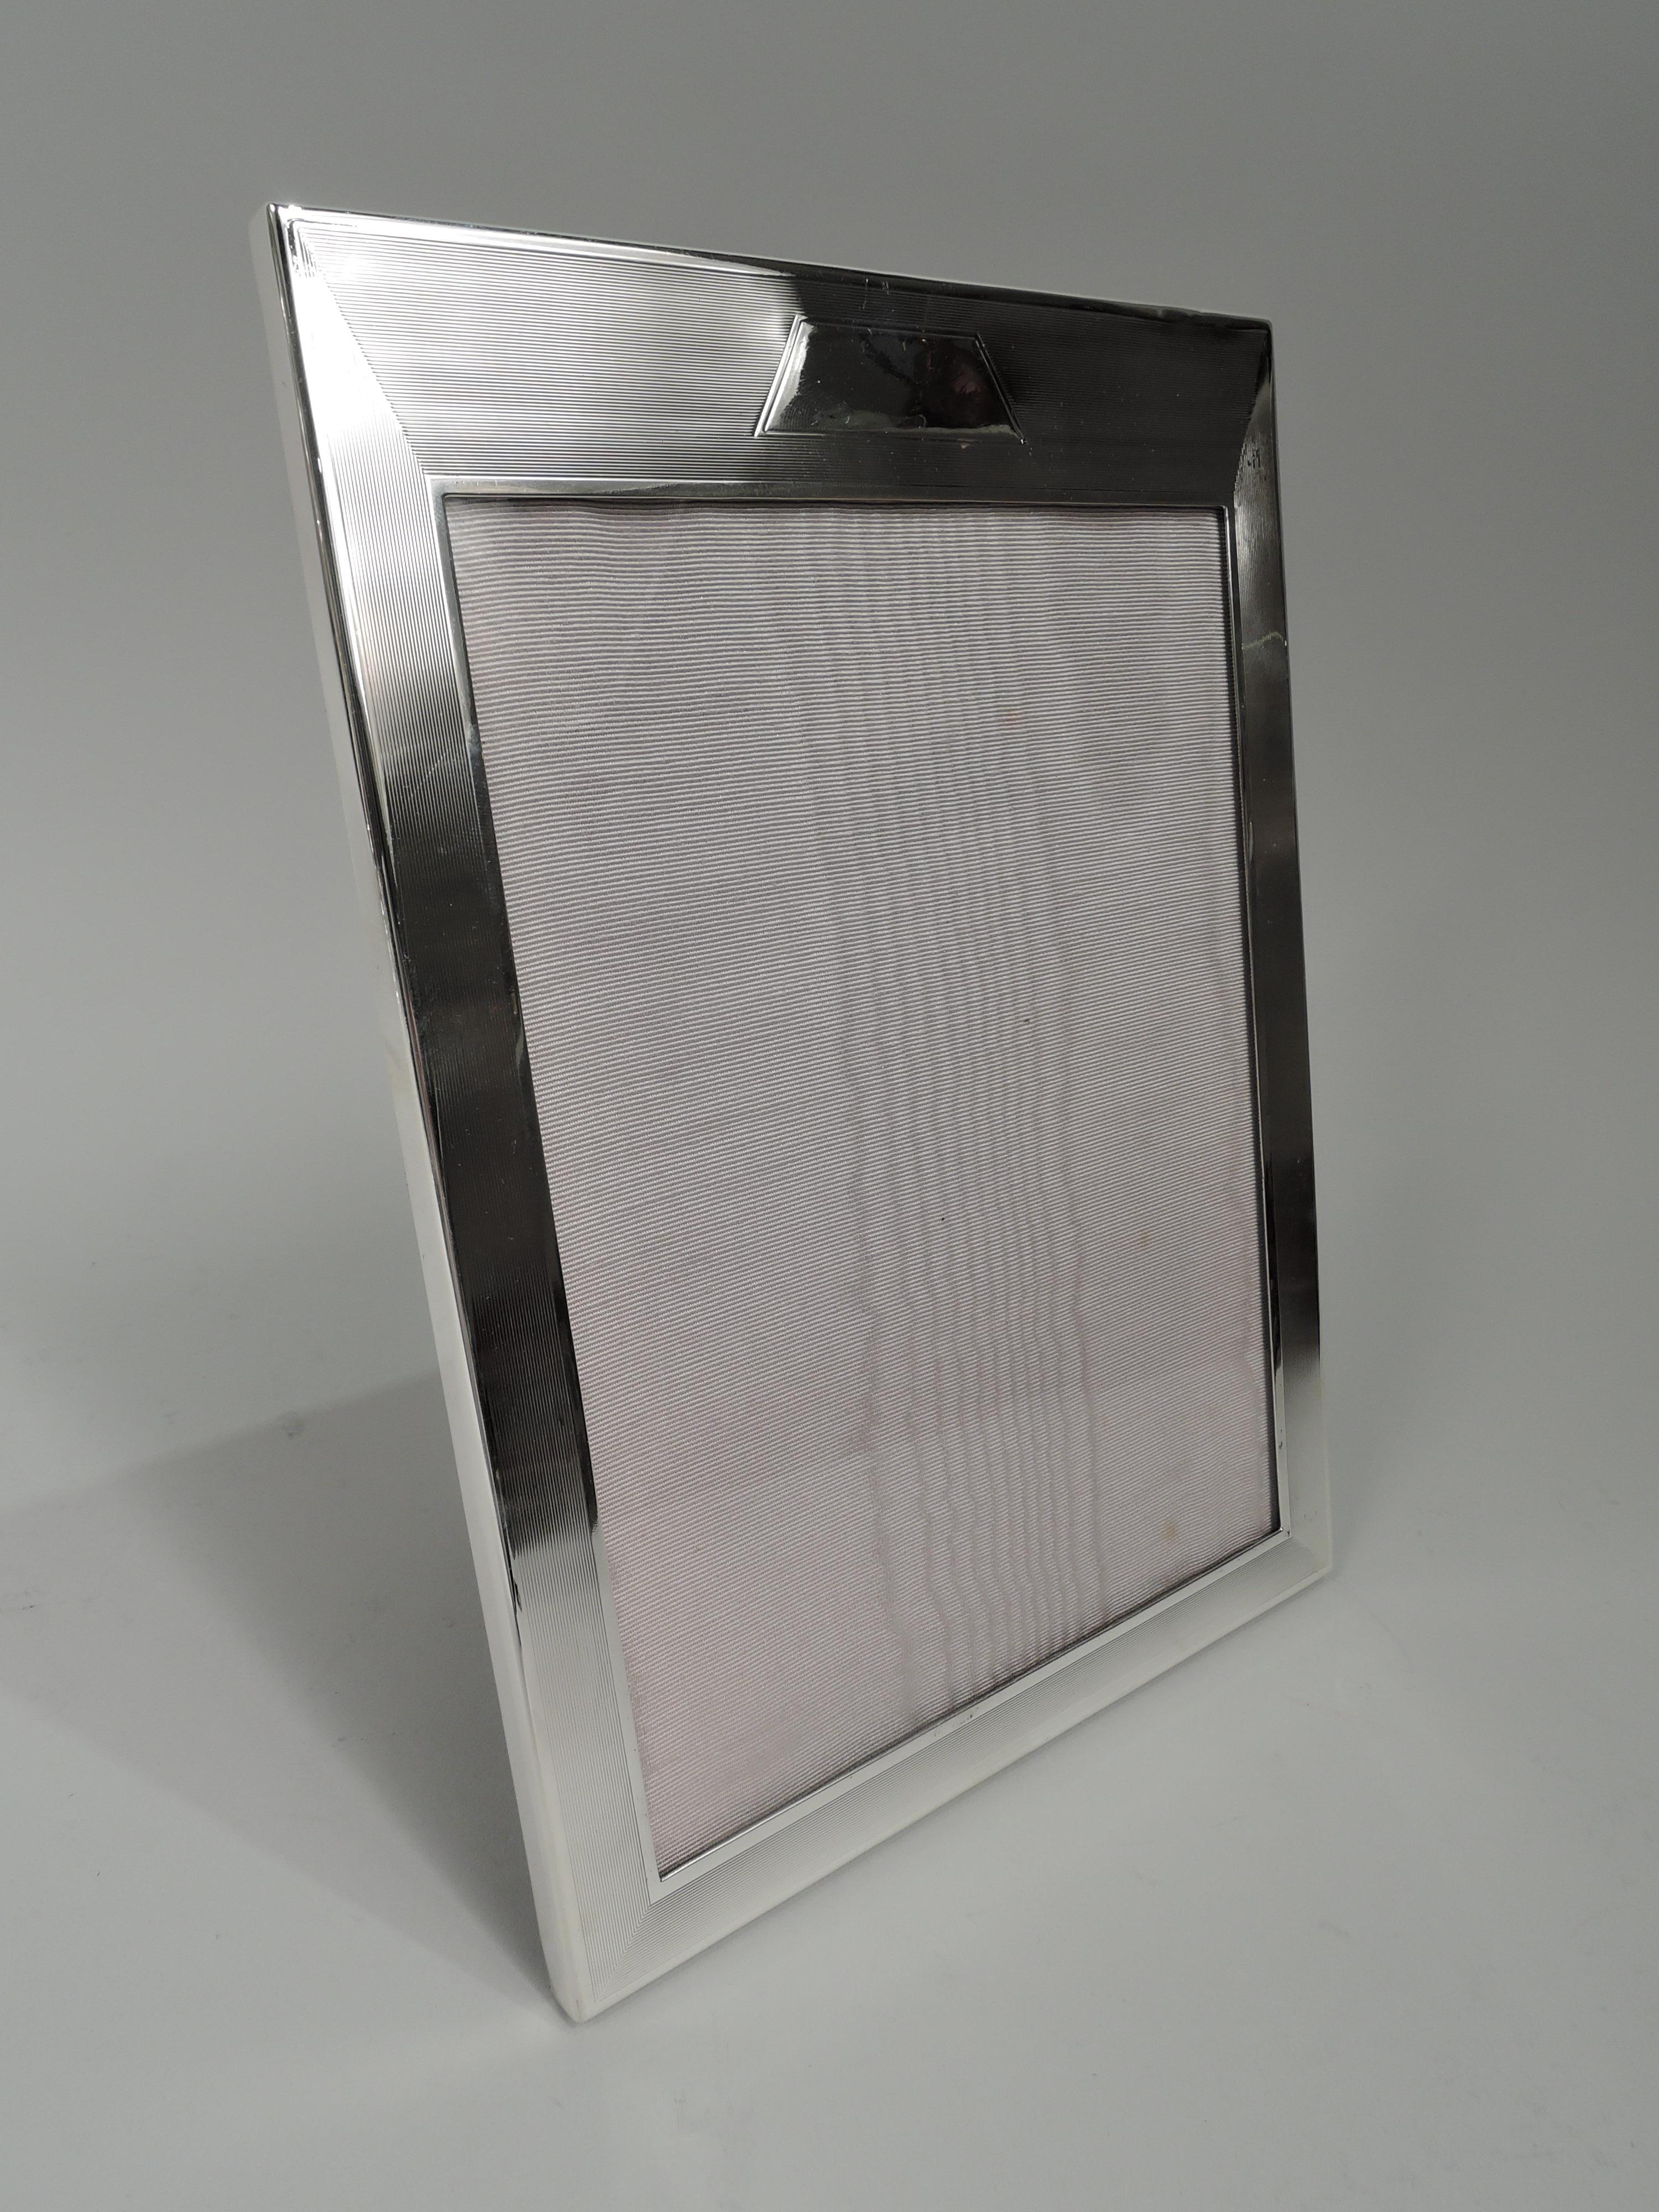 American Art Deco sterling silver picture frame, ca 1925. Rectangular window in flat surround with wraparound engine-turned lines between plain borders. Sides plain. Trapezoidal frame (vacant). With glass, silk lining, and velvet back and hinged